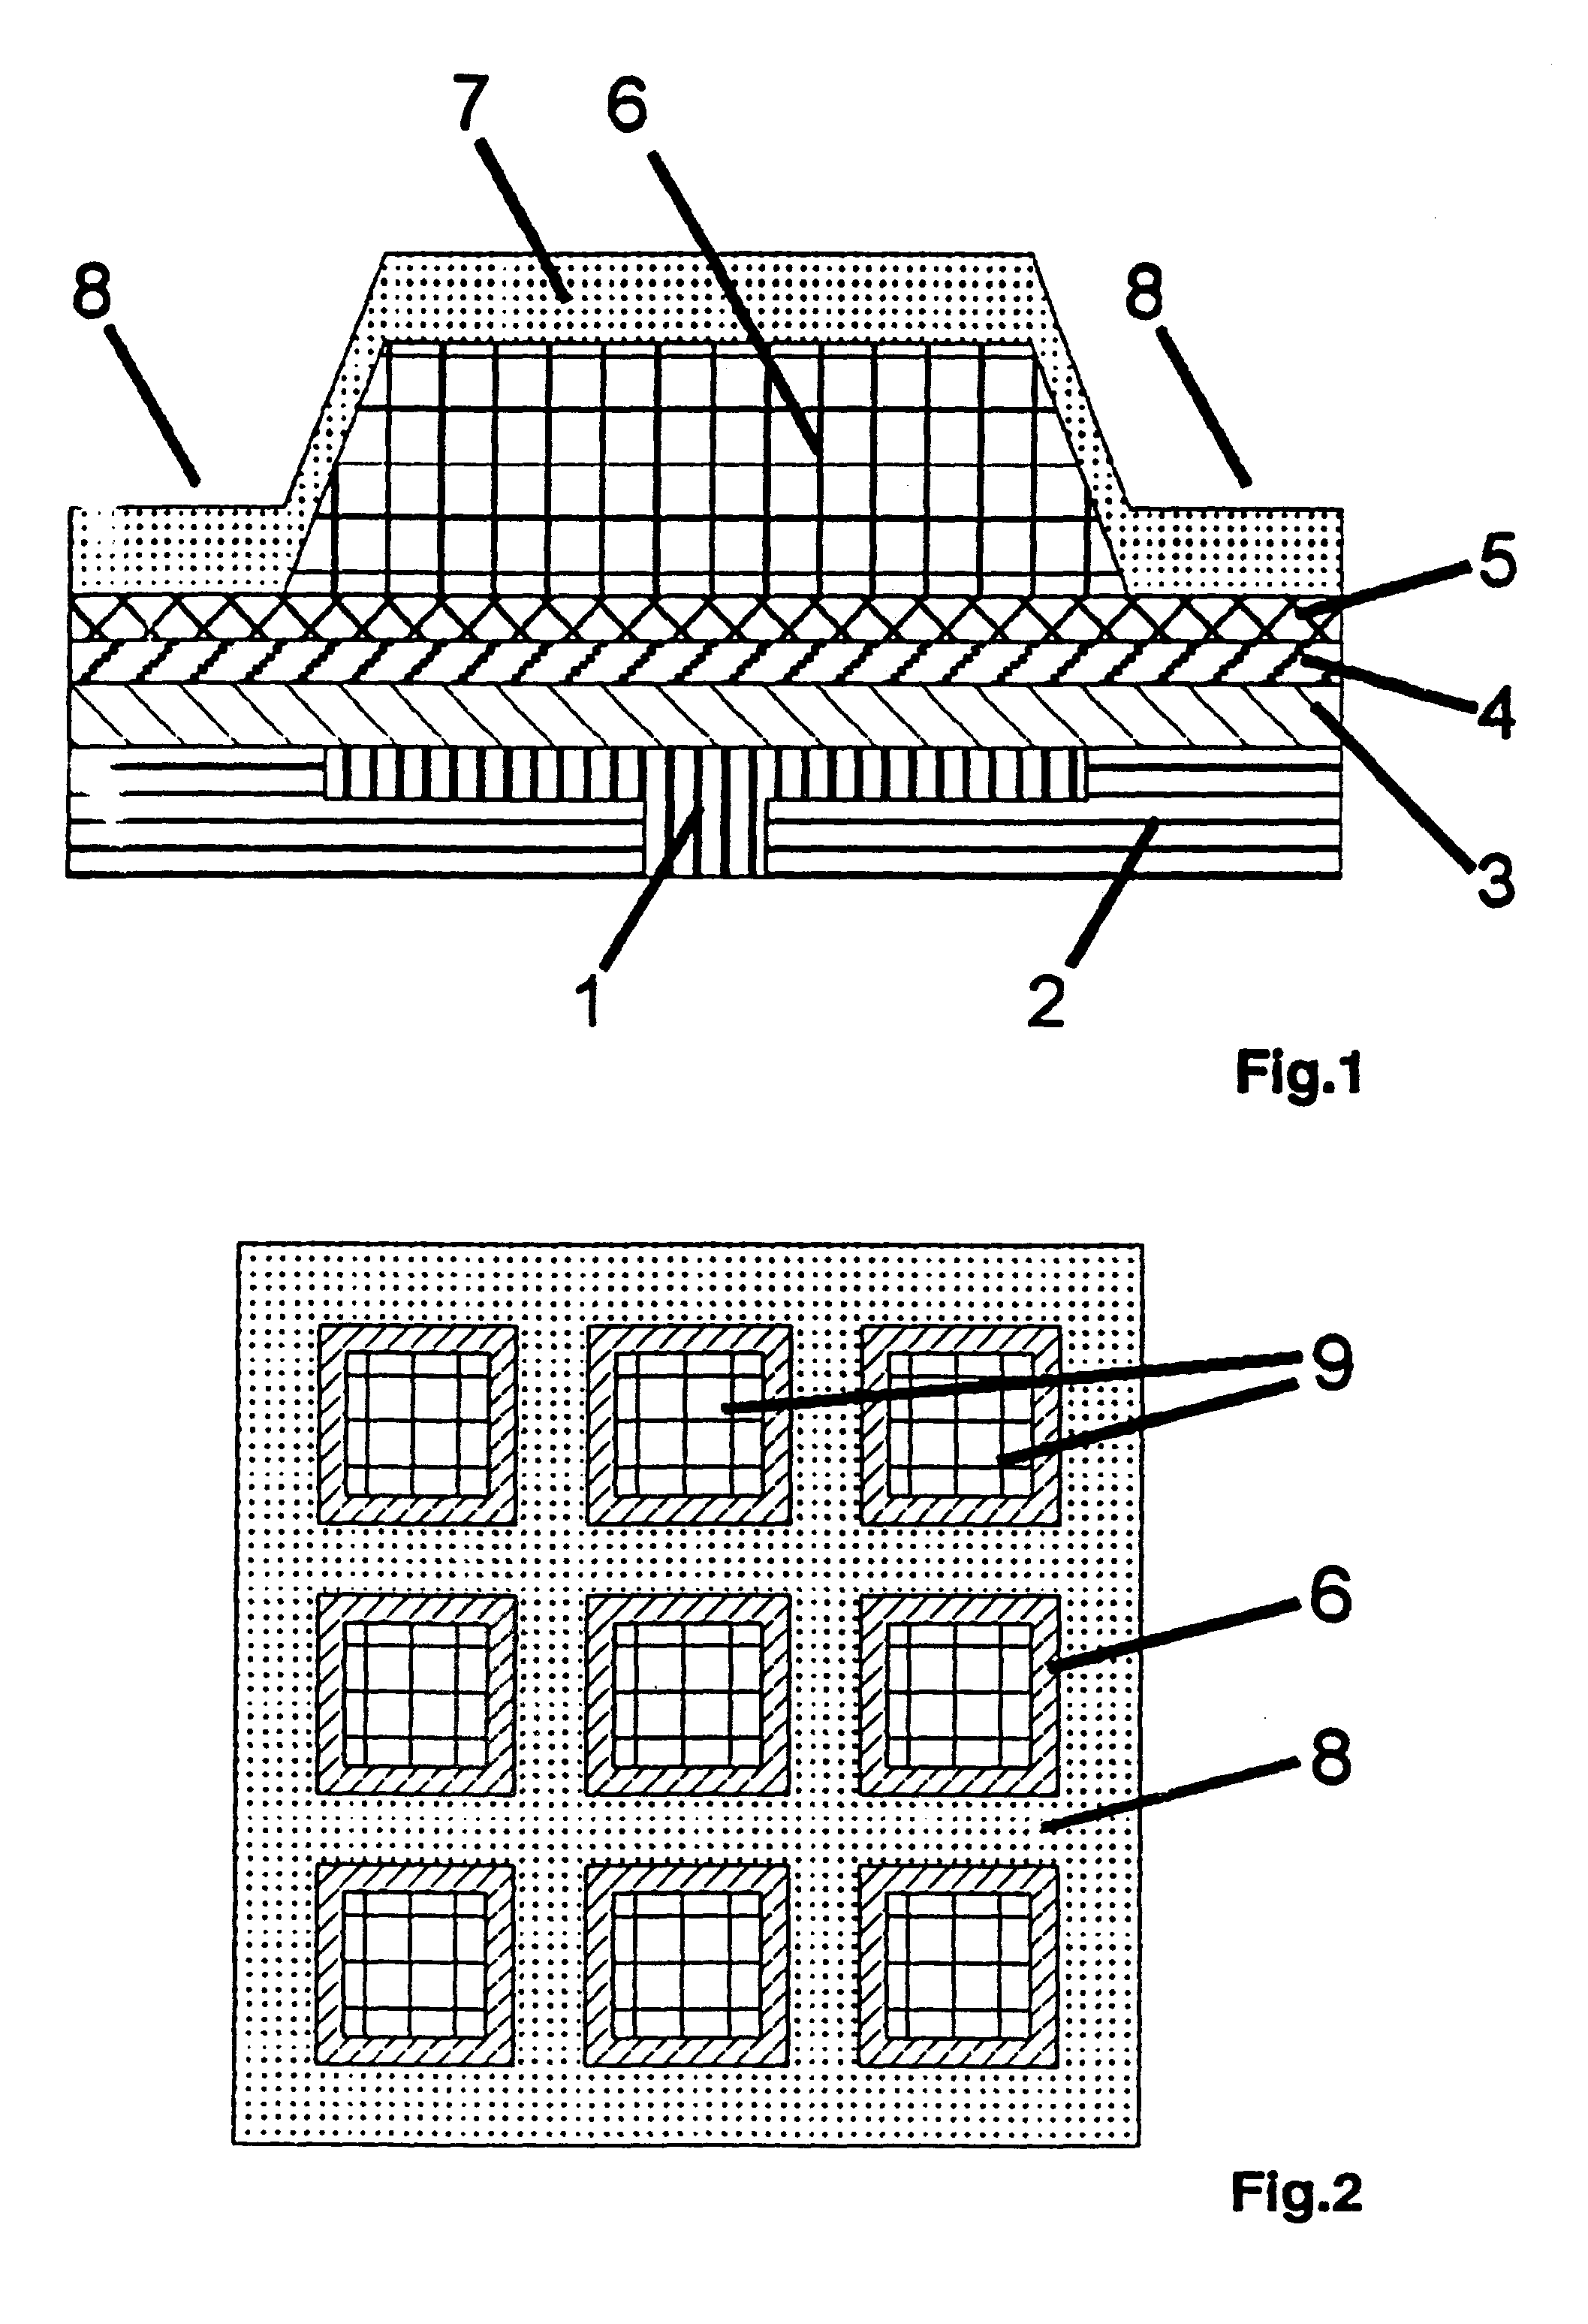 Method for producing an organic light emitting device (OLED) and structure produced thereby